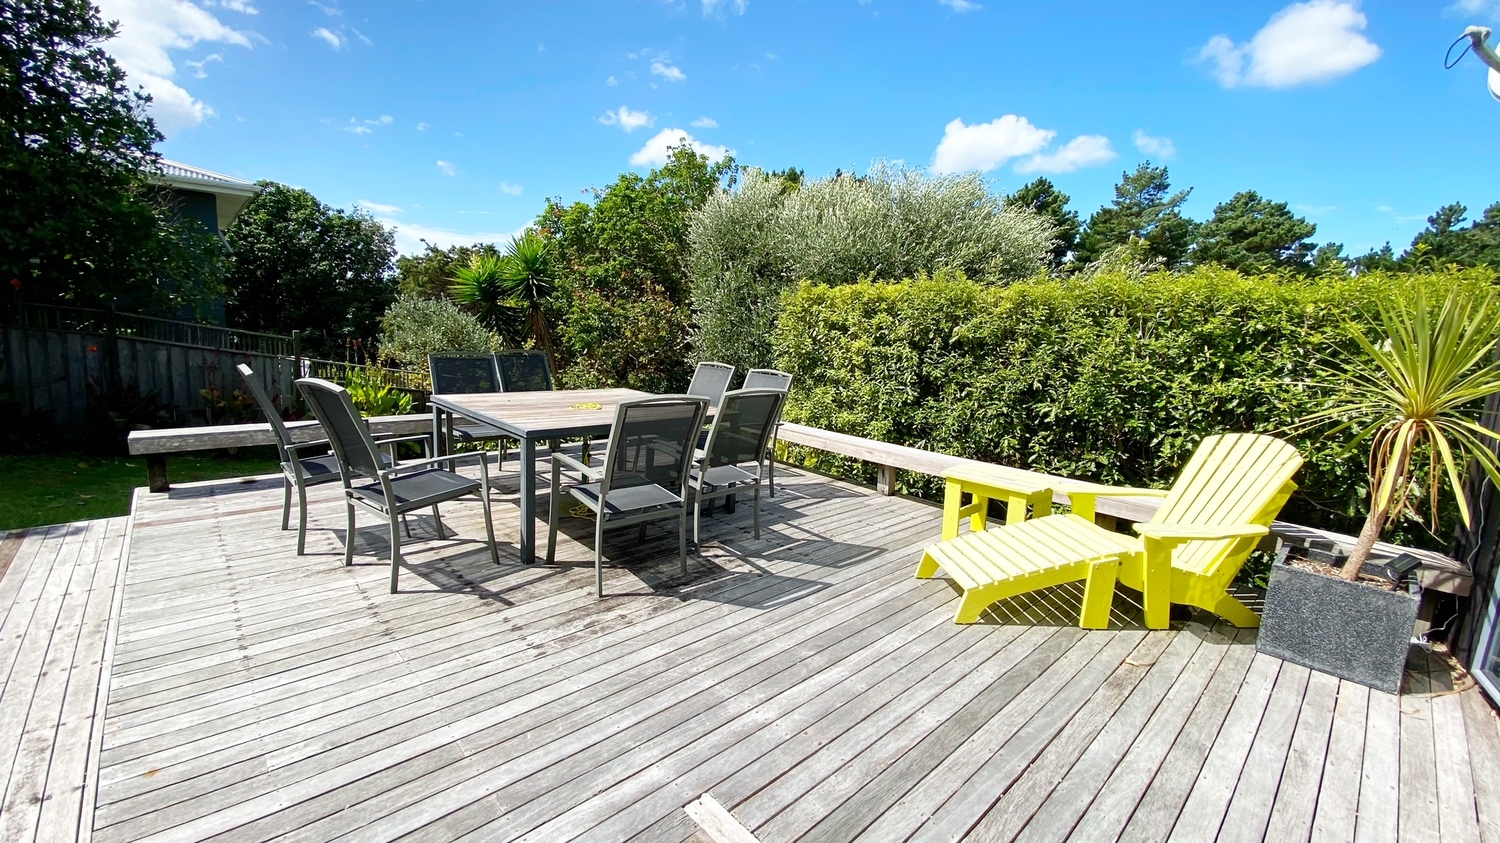 5._Woodlands_external-deck_with_dining_and_sun_lounger.msg_1500x843.jpg